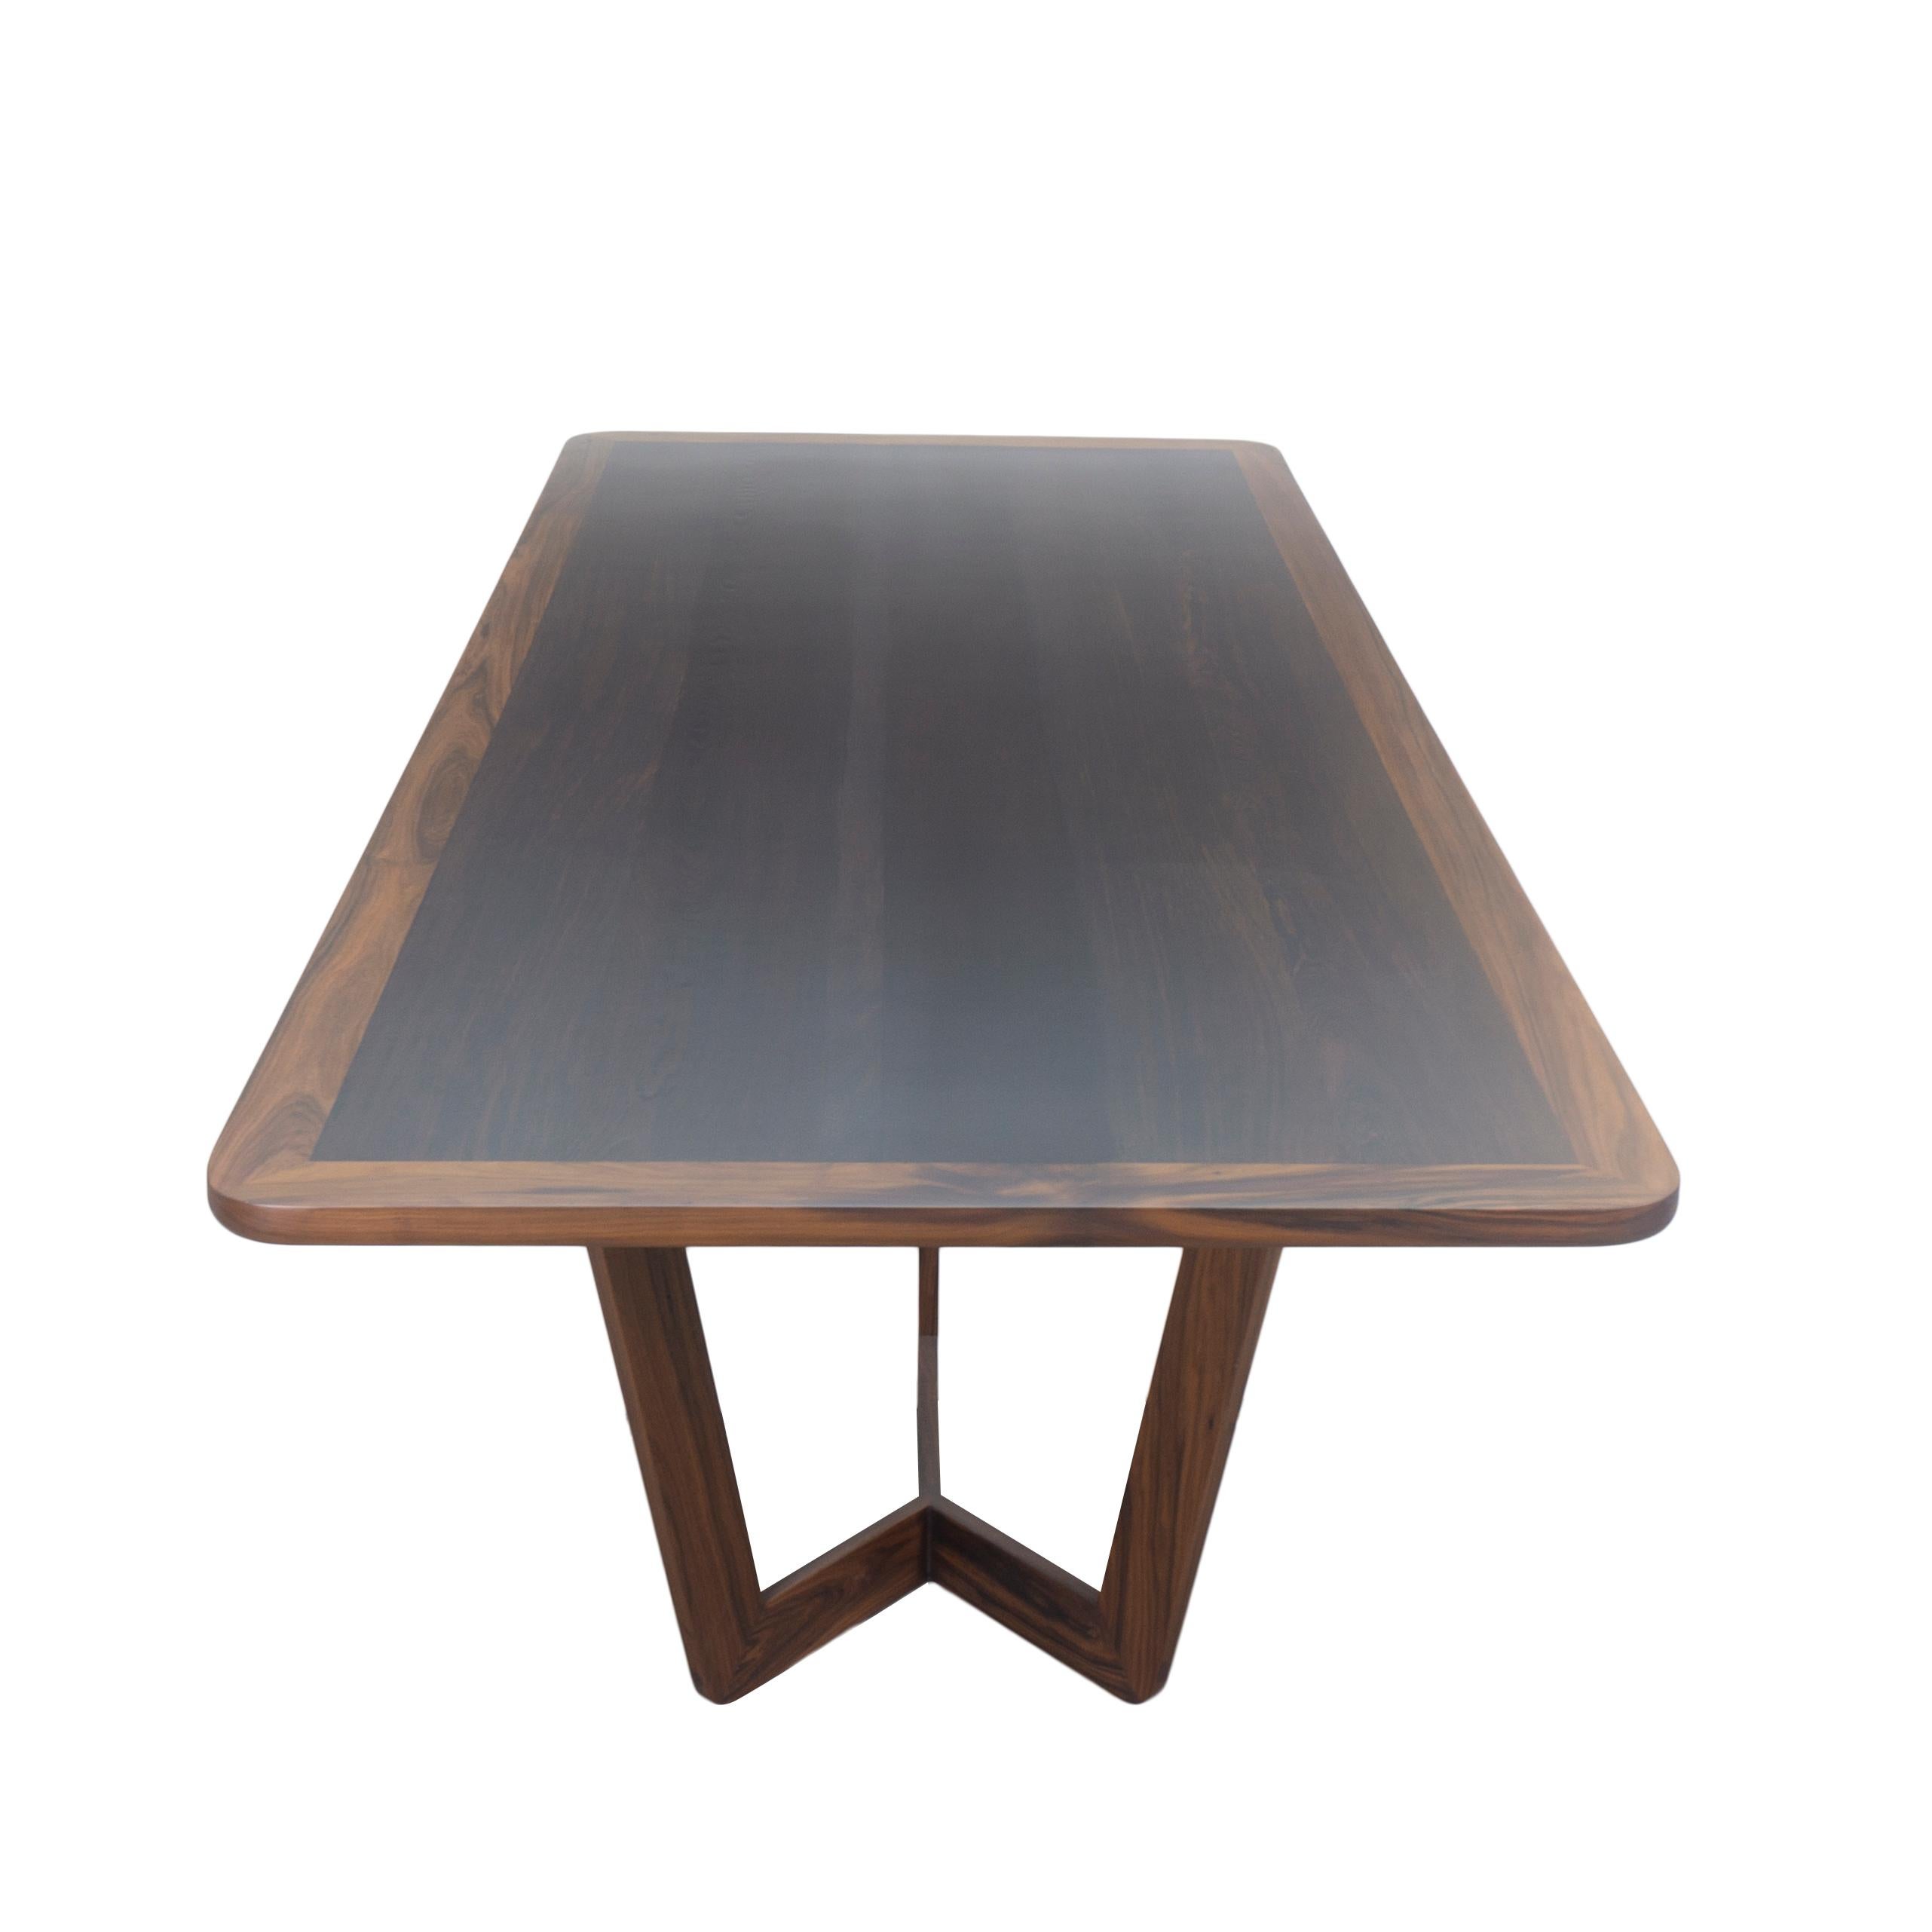 Contemporary Modern Wooden Dining Table For Sale